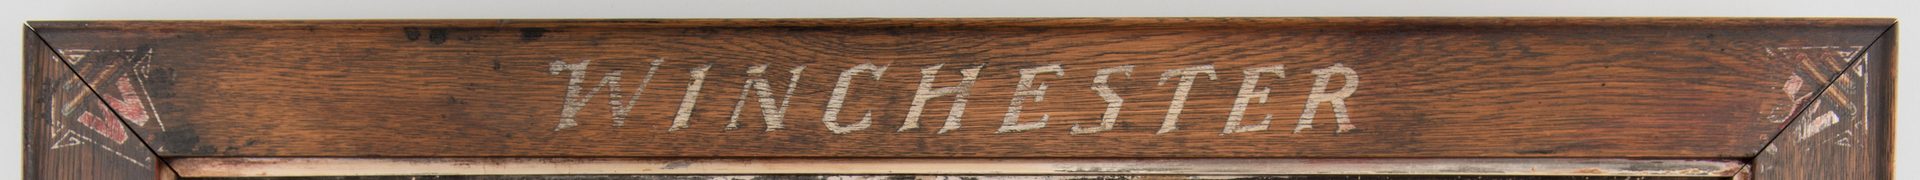 Lot 834: H. R. Poore Winchester Sign with Hunting Dogs